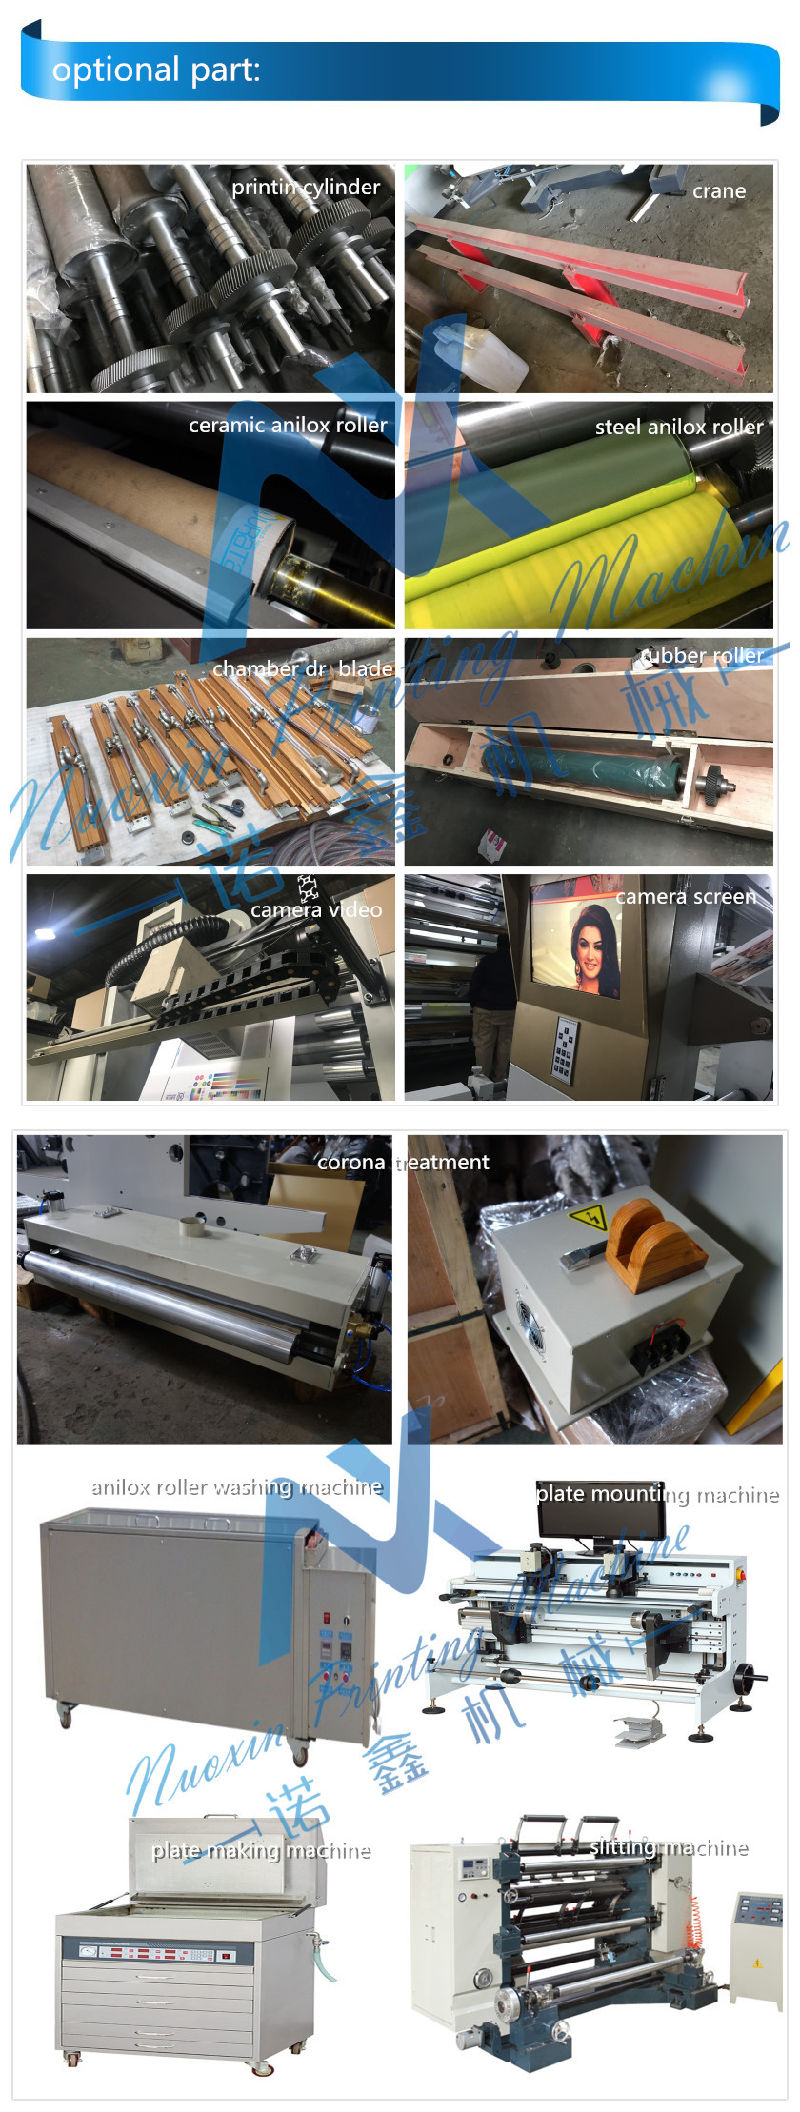 4 Colour Flexible Packages Flexo Printing Machine/Machinery Stack Type